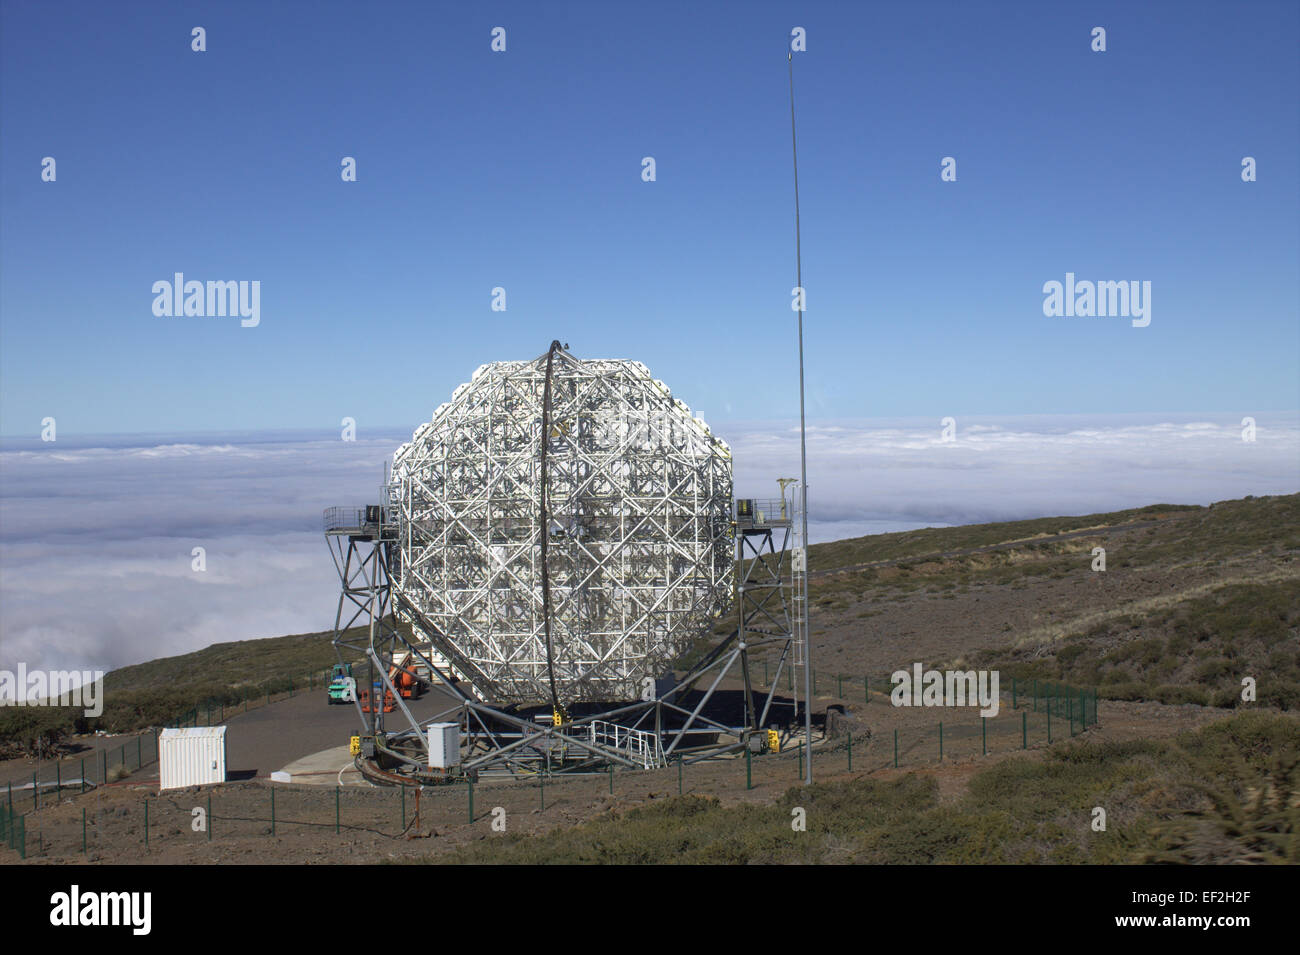 La Palma, Spain - 18th Jan 2015: MAGIC detect particle showers released by gamma rays/ radiation. Stock Photo